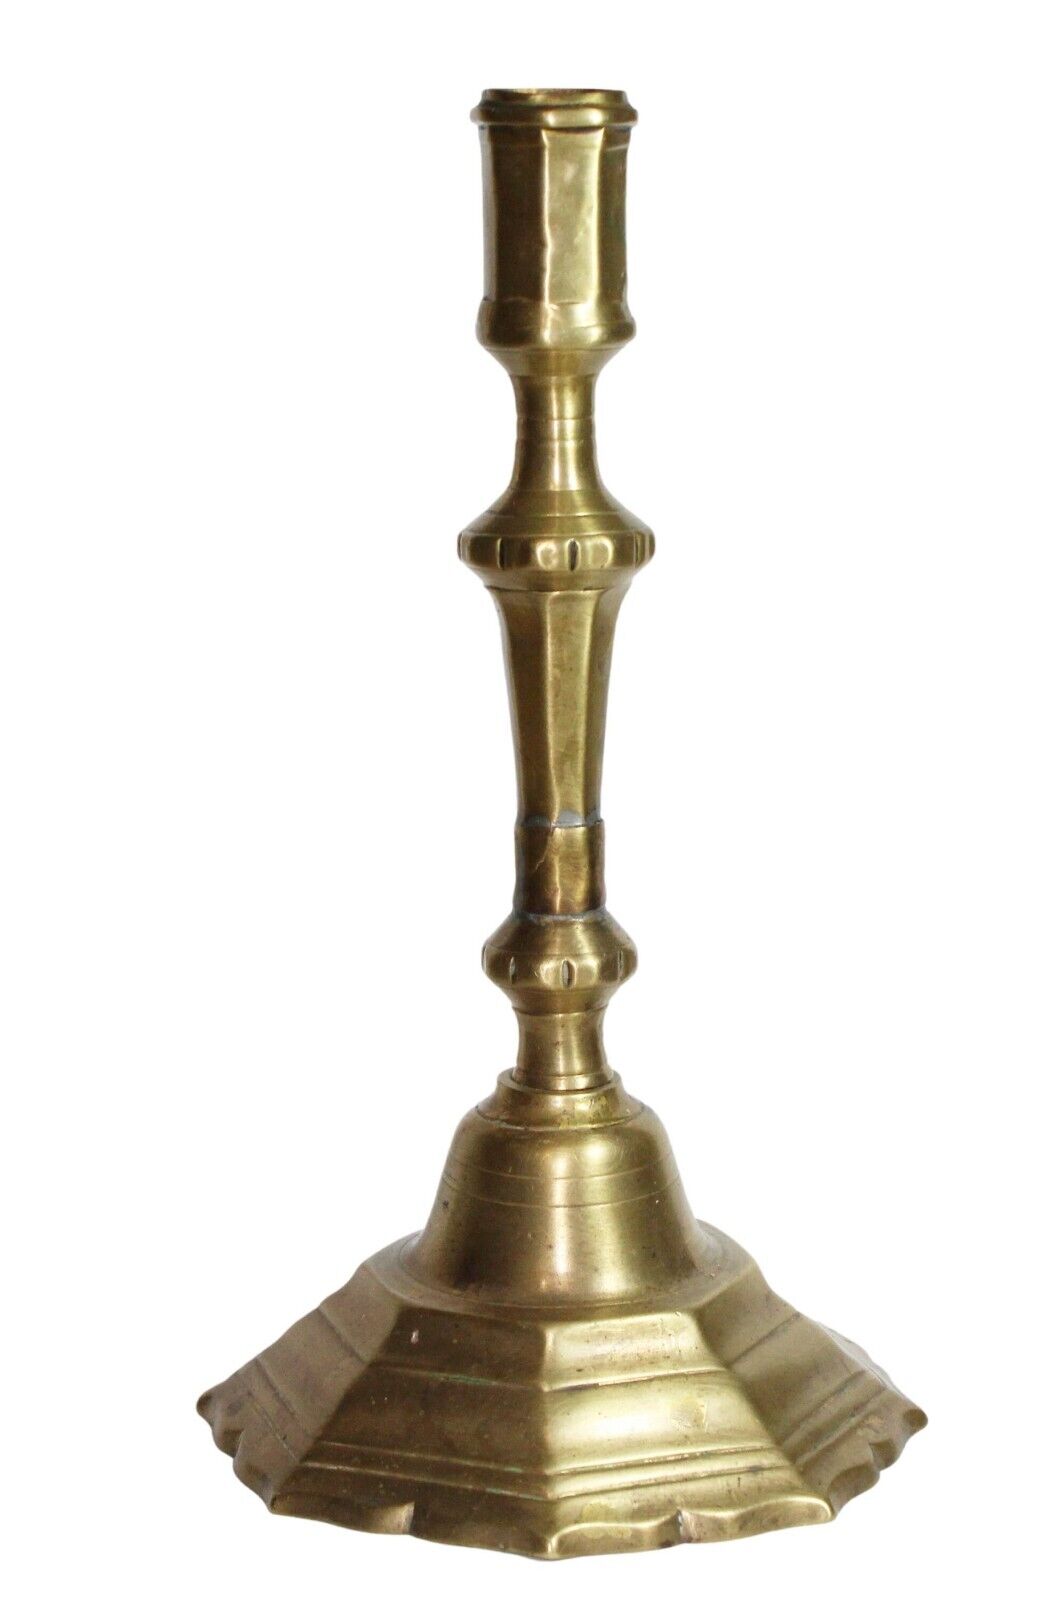 Original Early- Mid 18th Century French Brass Candlestick